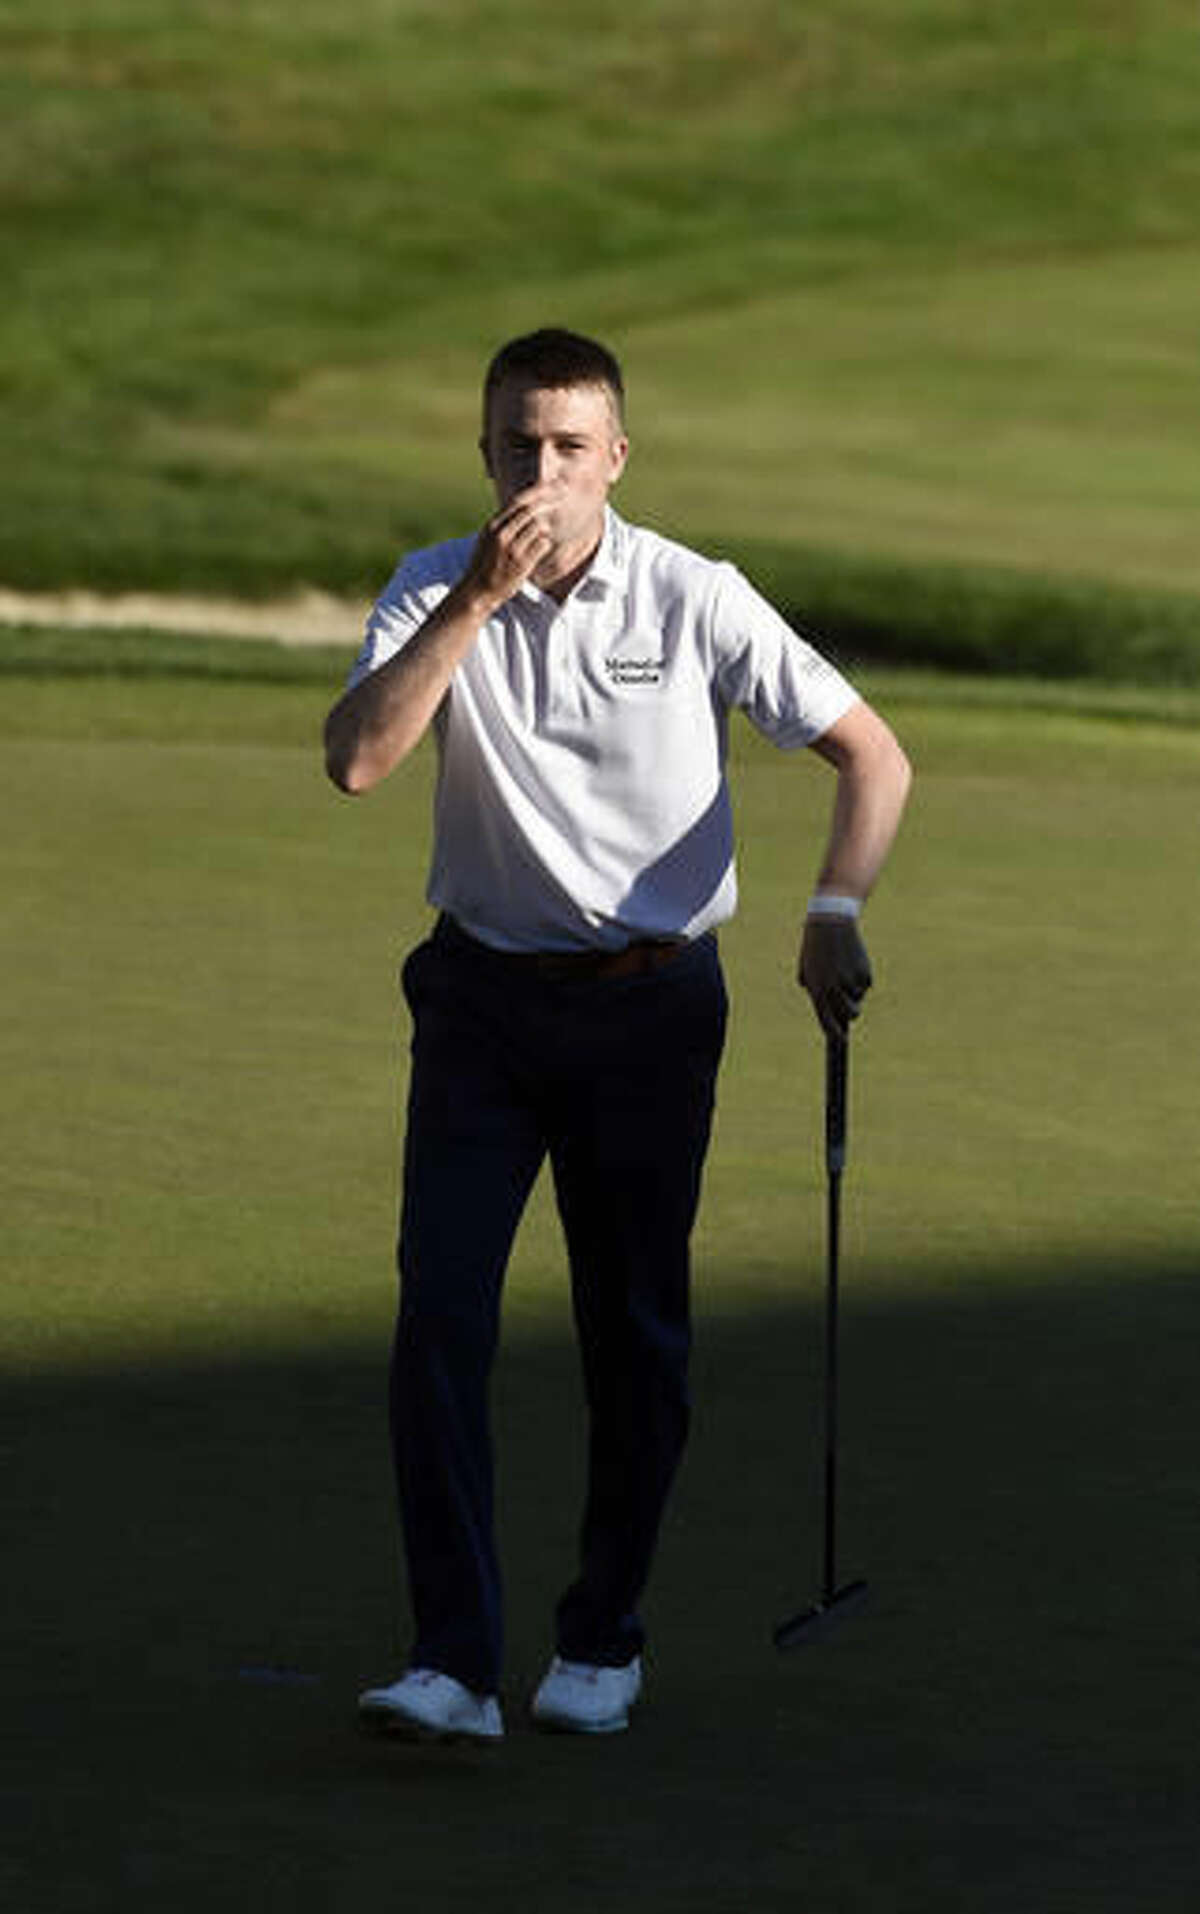 Russell Knox, from Scotland, celebrates after his winning putt on the 18th hole during the final round of the Travelers Championship golf tournament in Cromwell, Conn., Sunday, Aug. 7, 2016. (AP Photo/Fred Beckham)